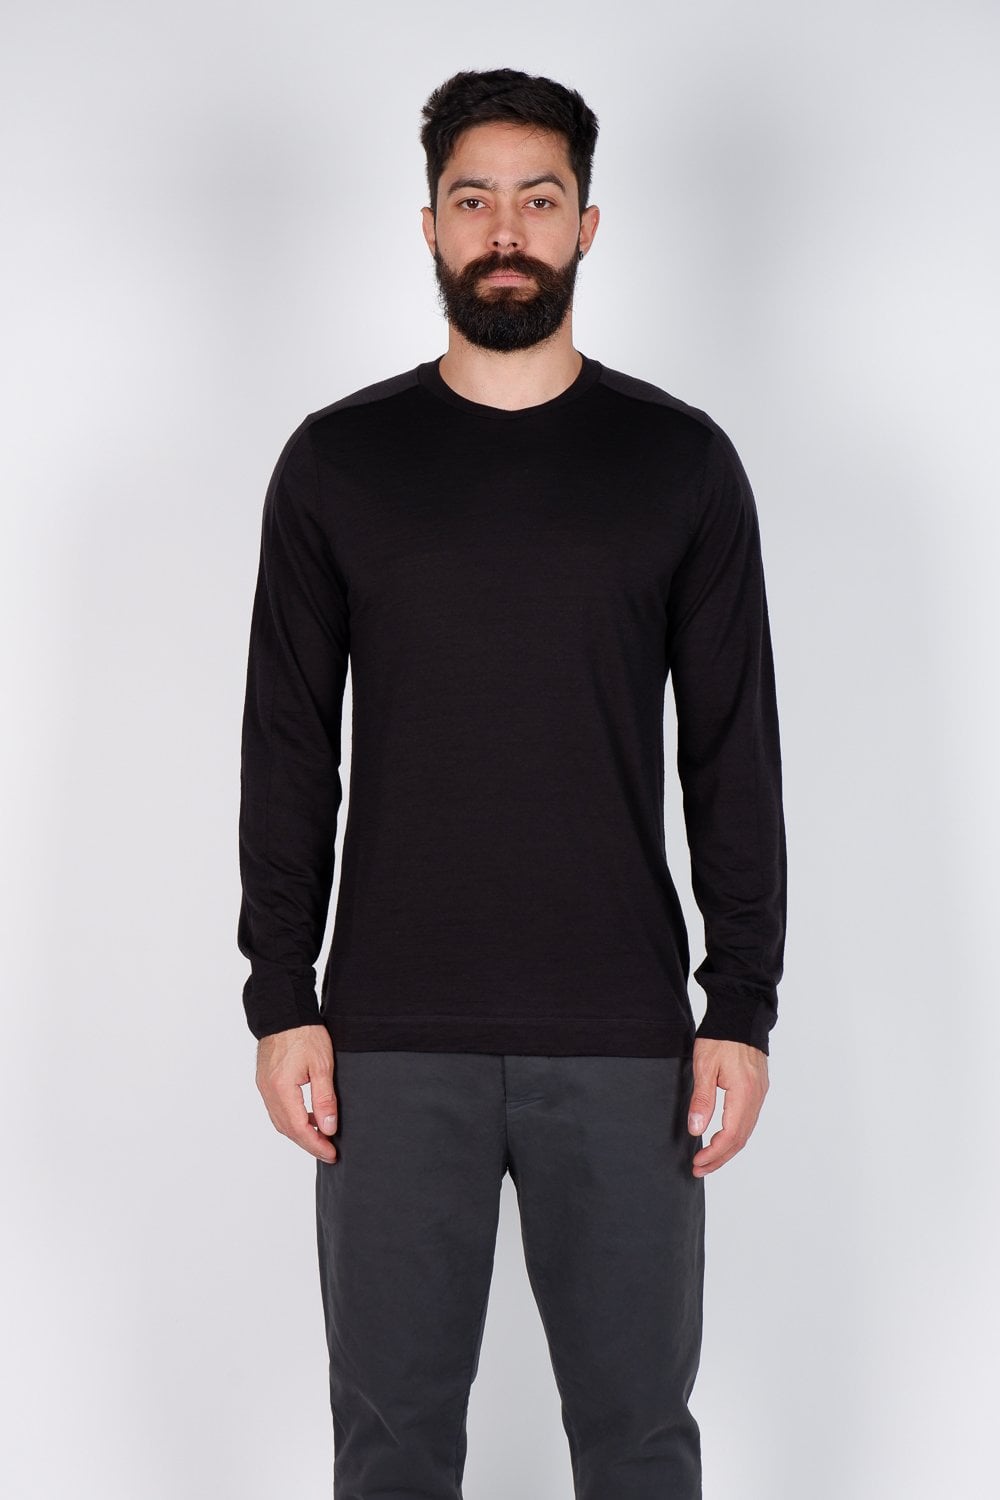 Buy the Transit Long Sleeve Light Wool T-Shirt Black at Intro. Spend £50 for free UK delivery. Official stockists. We ship worldwide.